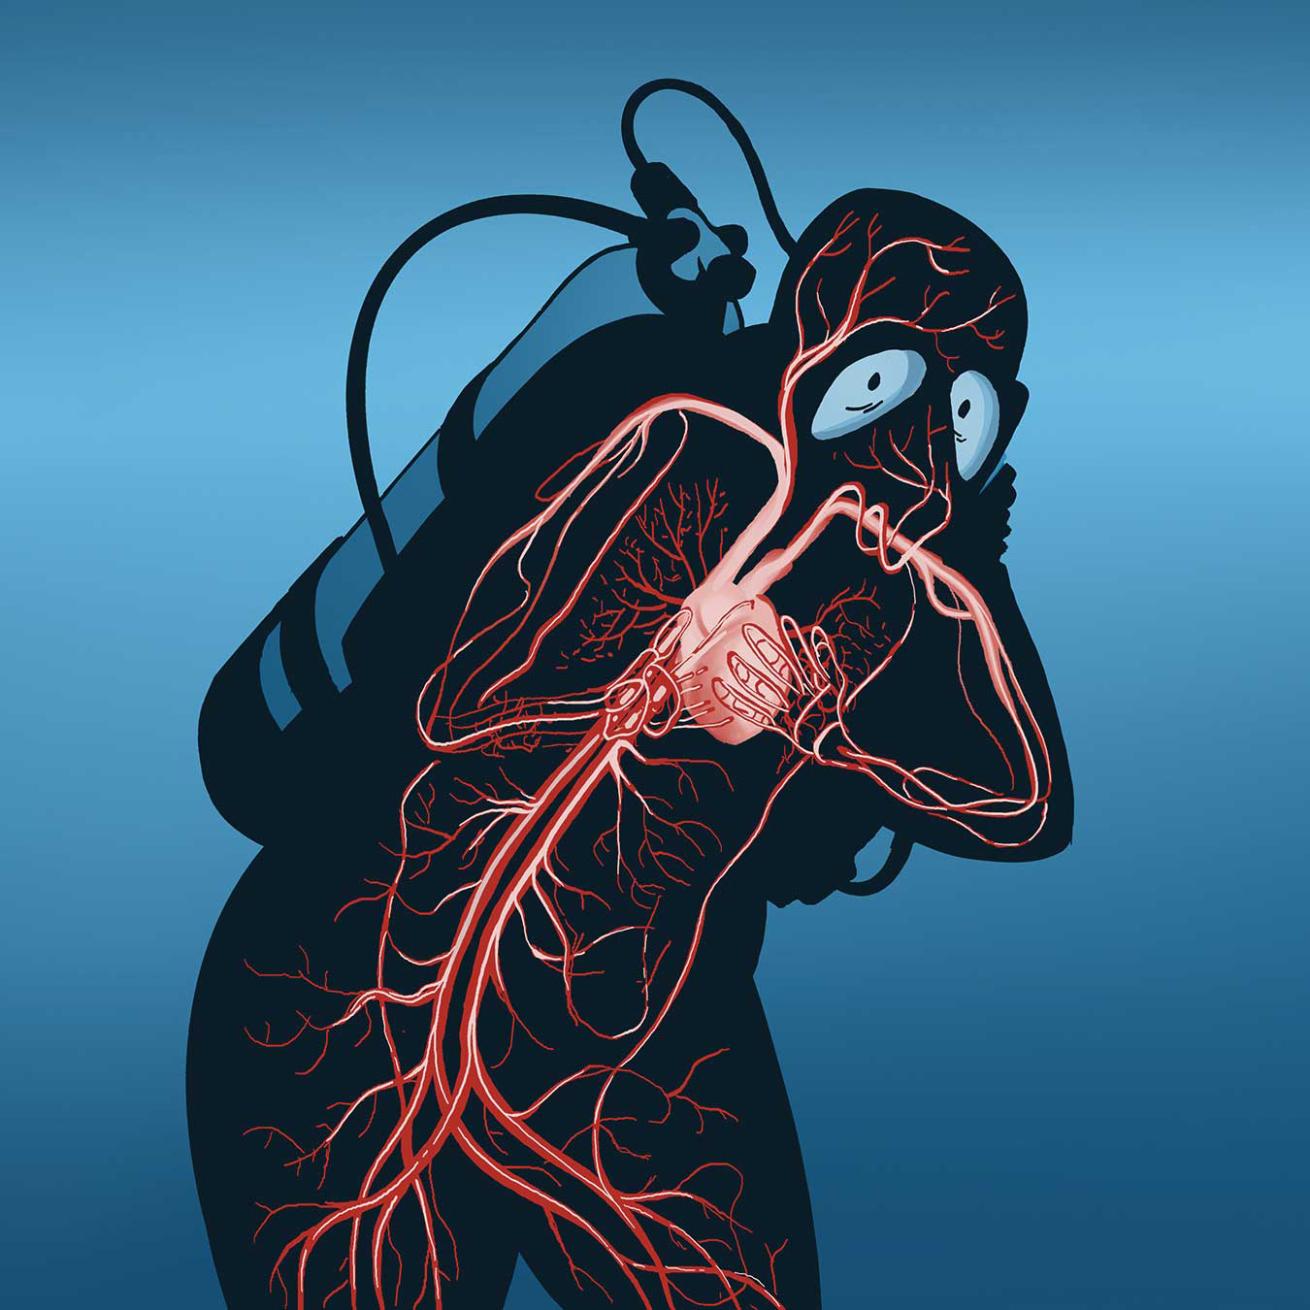 An illustration of a diver grabbing their heart